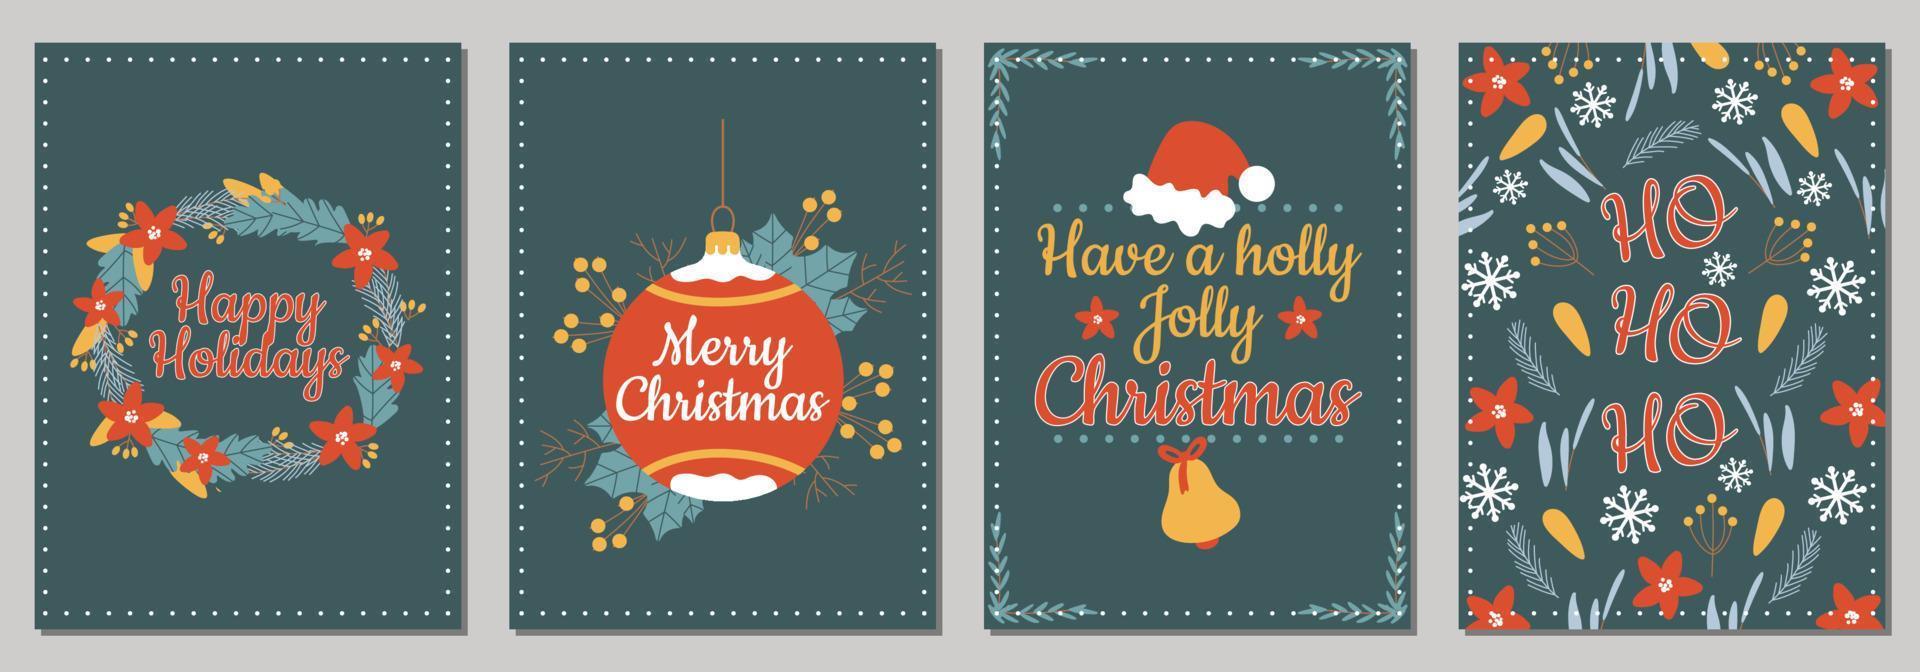 Christmas cards with merry christmas with xmas decorations and typography design. Vector illustration. Happy Holidays and happy new year